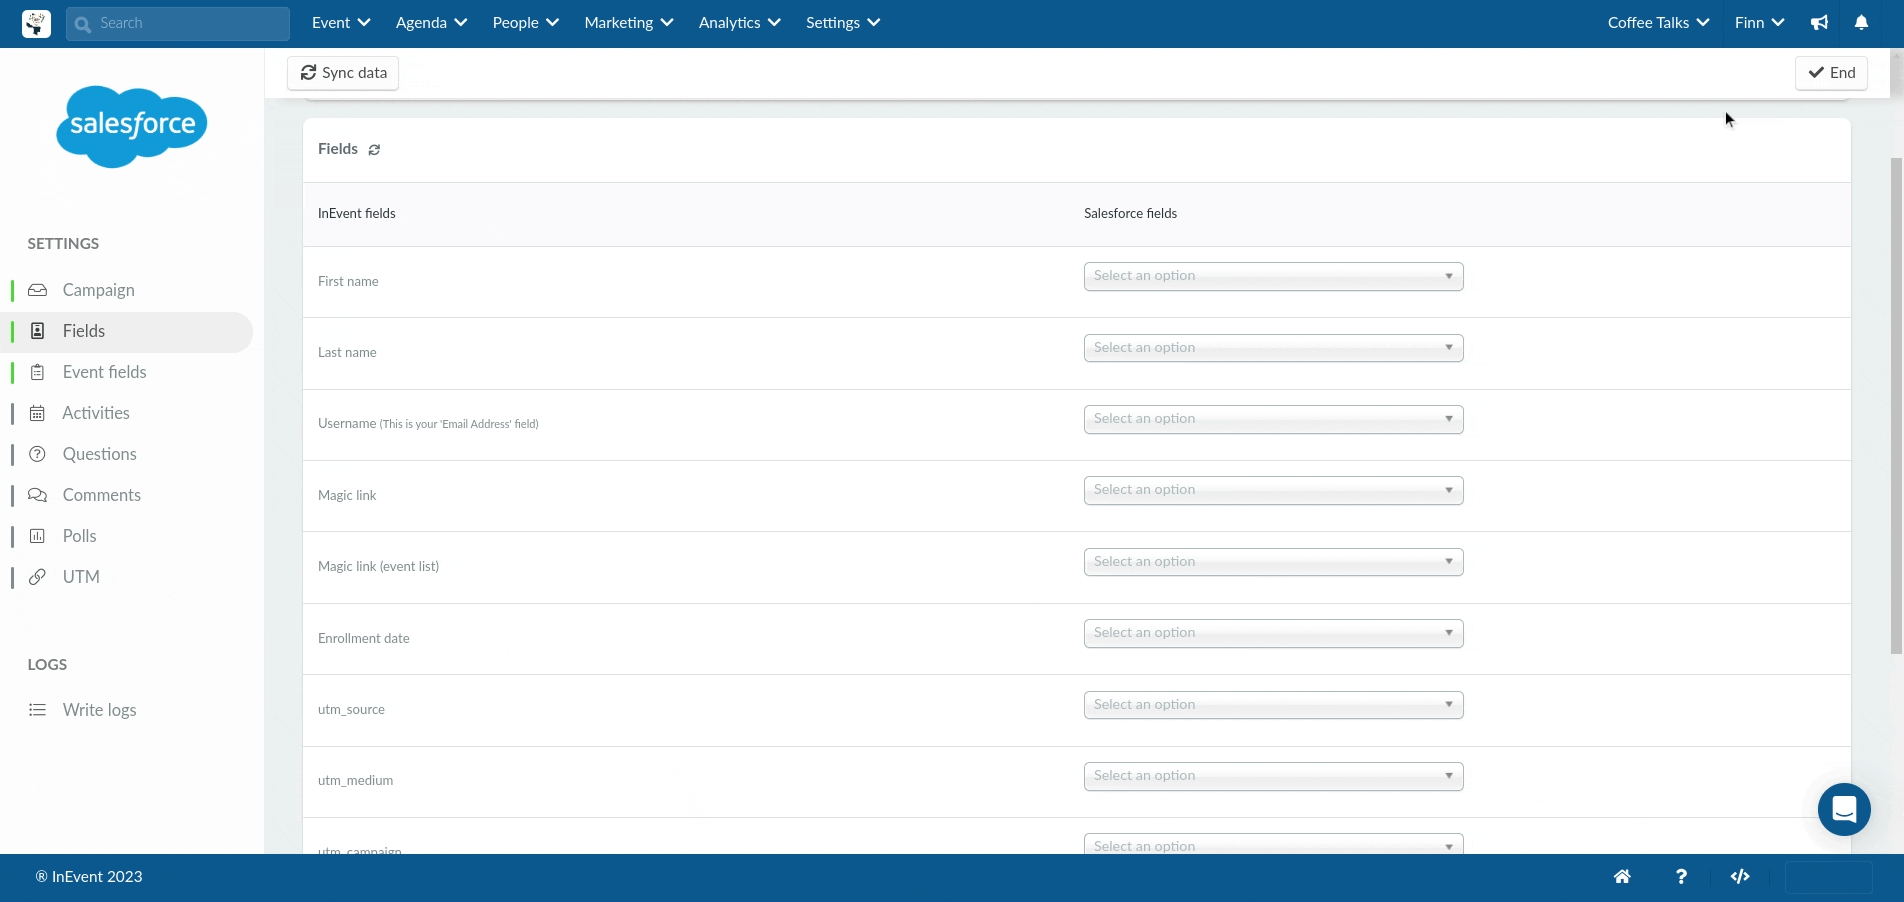 GIF showing how to link InEvent fields with Salesforce fields and showing available Salesforce fields.